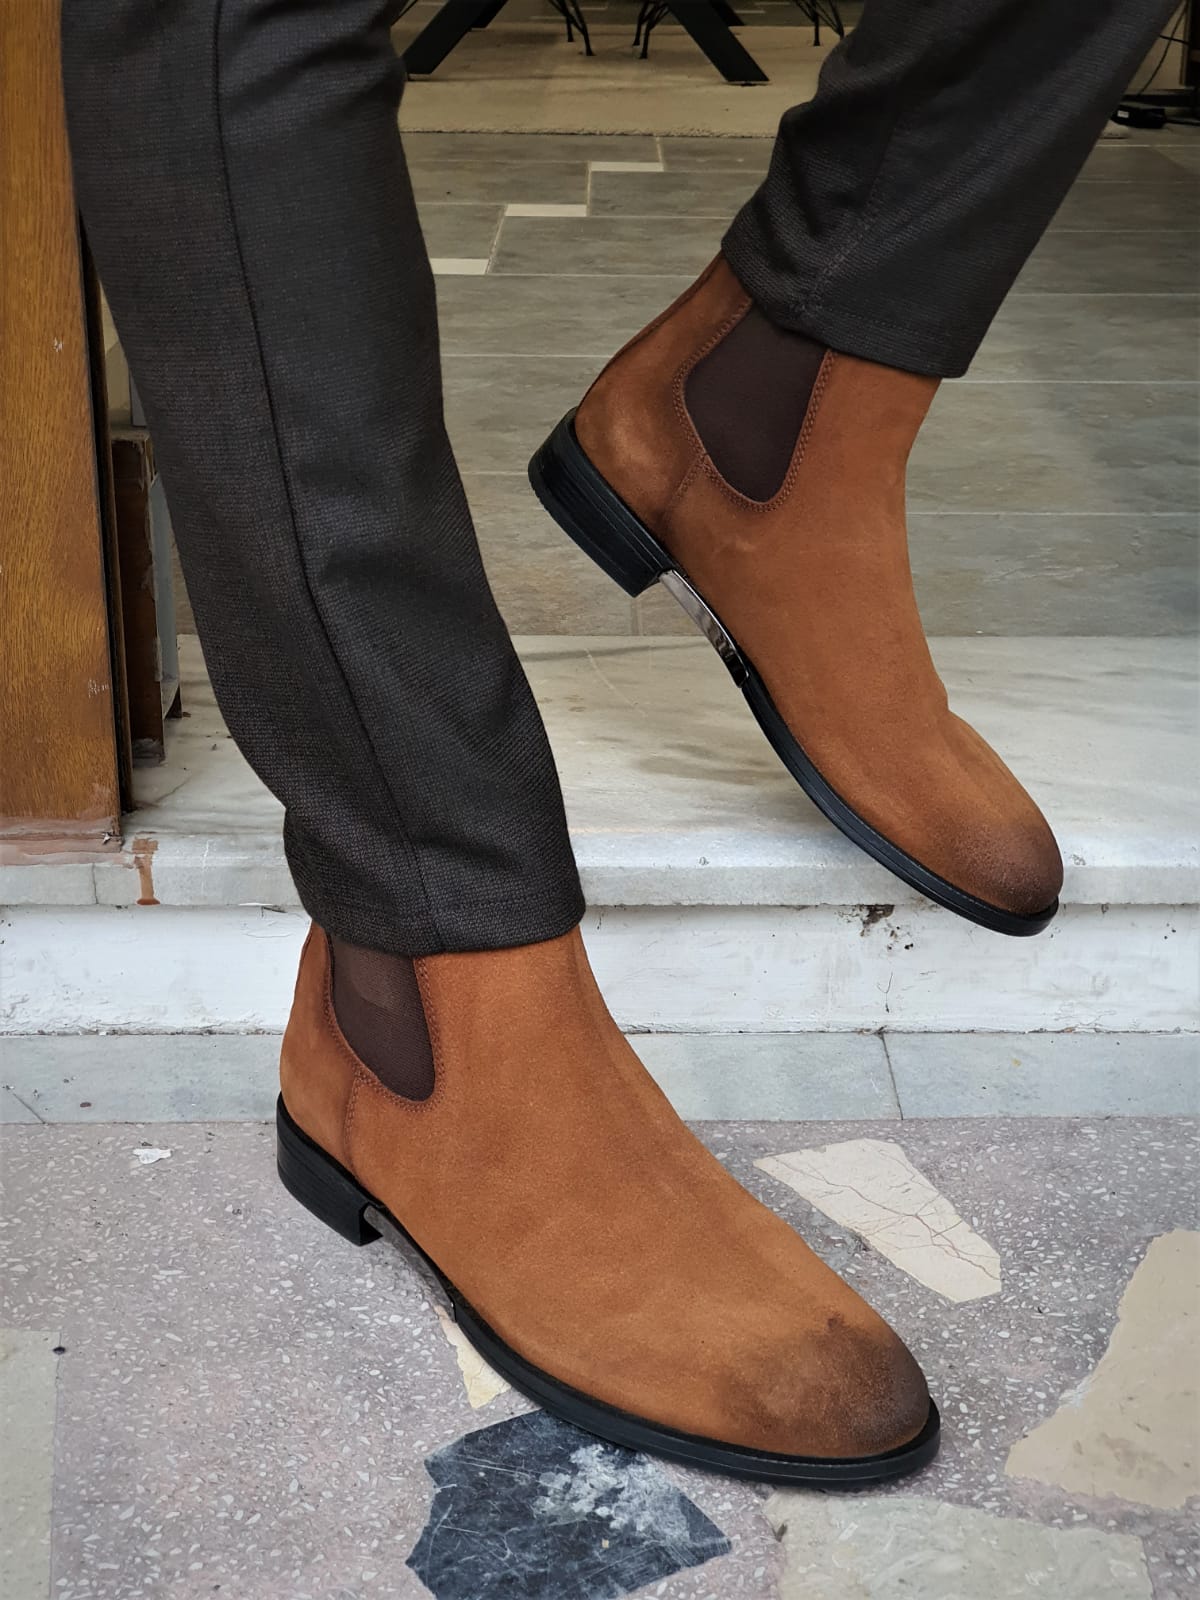 The Best Winter Boots For Men 2021 by GentWith Blog